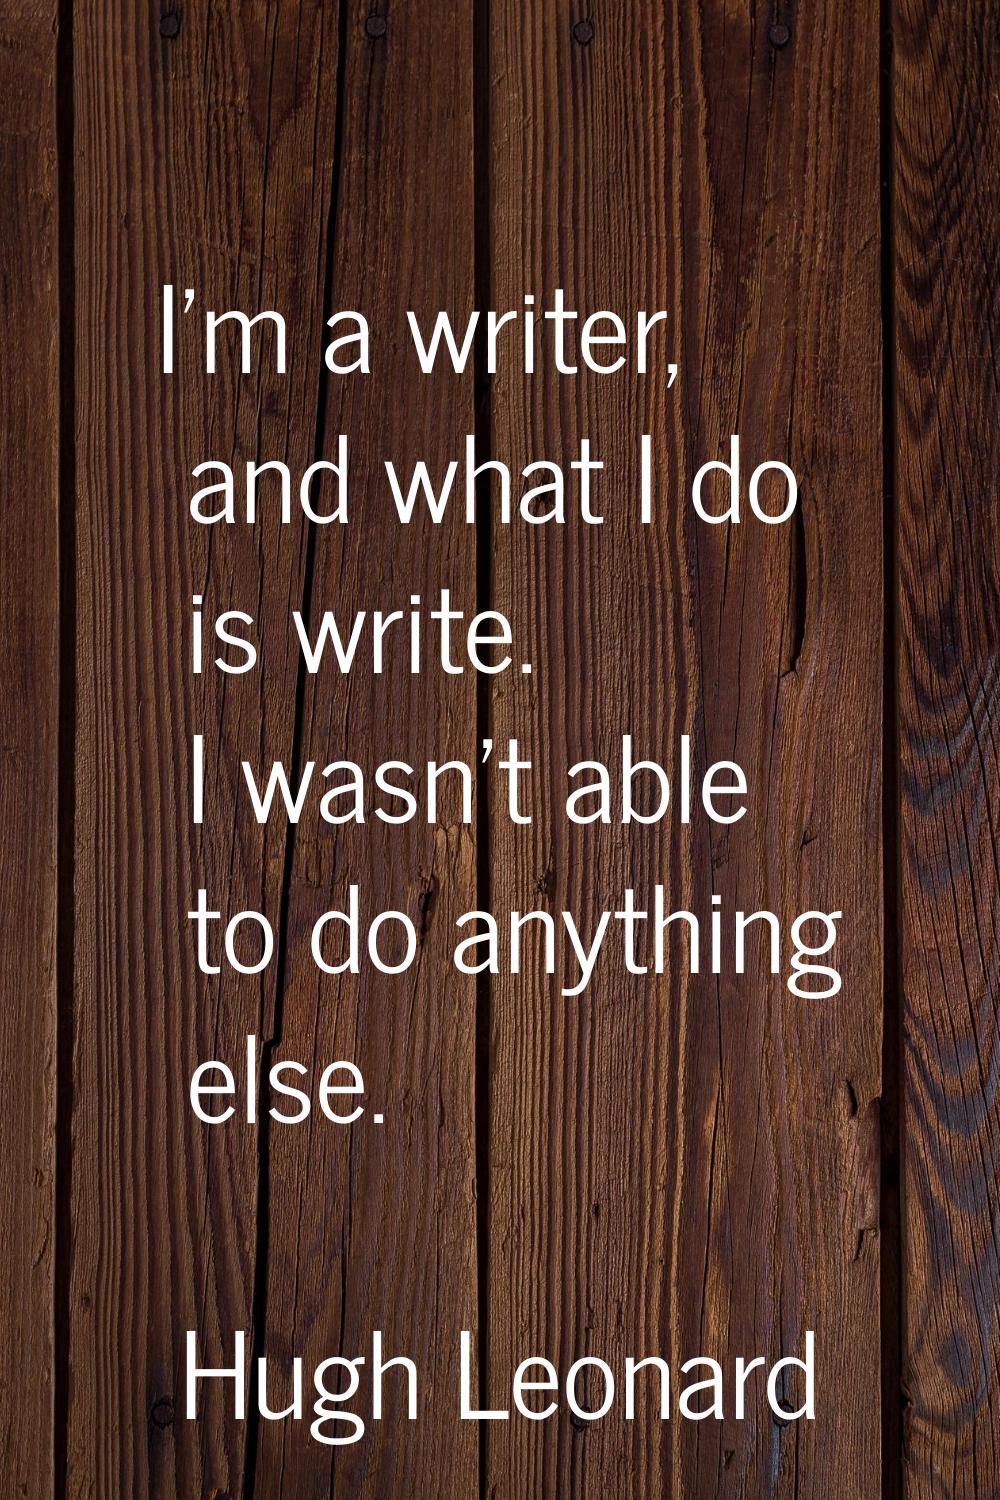 I'm a writer, and what I do is write. I wasn't able to do anything else.